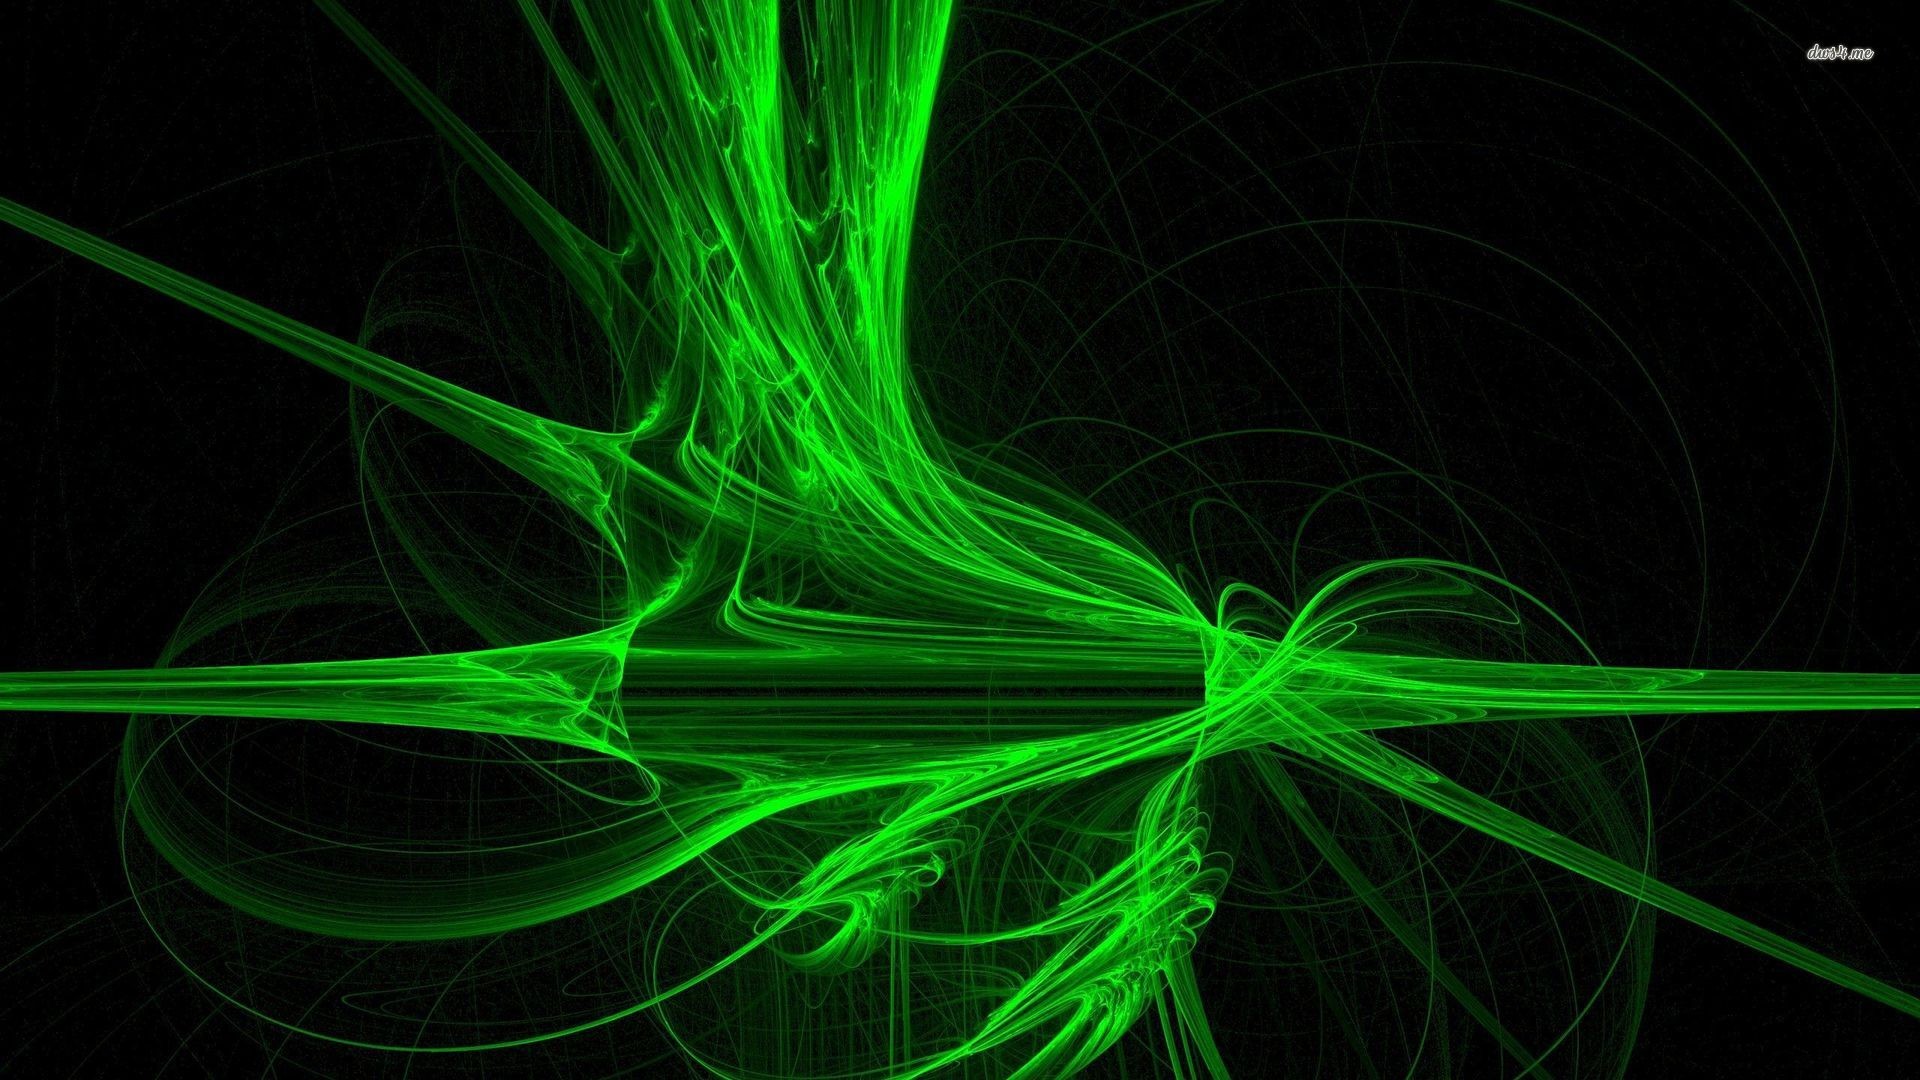 1920x1080 Bestofpicture.com Images Pretty Neon Green Backgrounds - HD Wallpapers